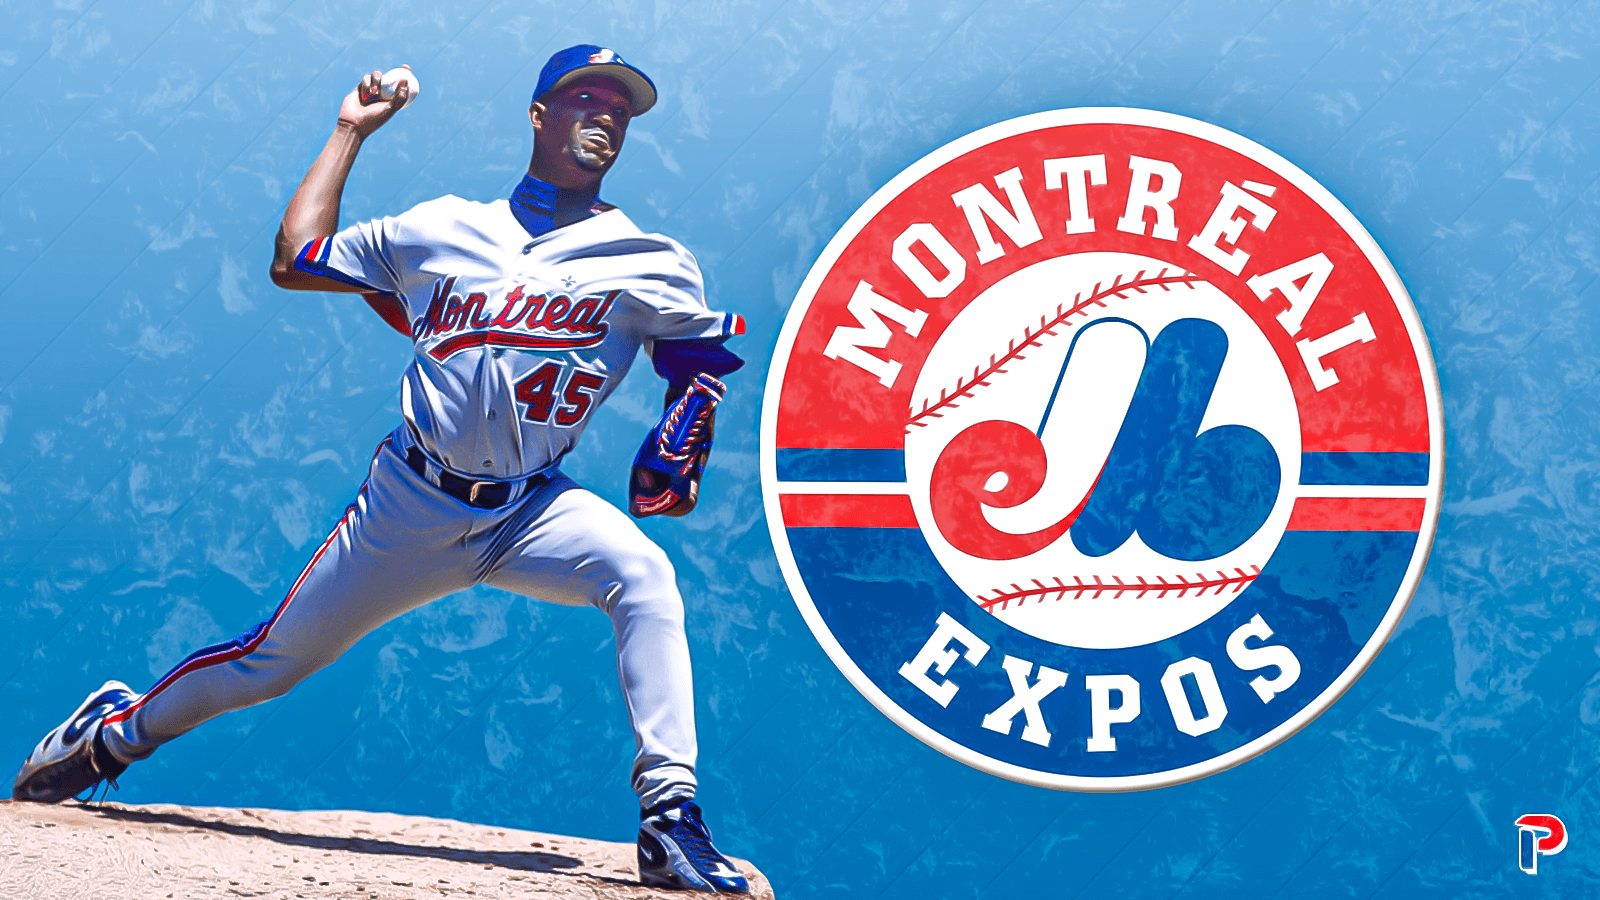 The Montreal Expos in 2020, Pt. 2: Possibilities in the Near and